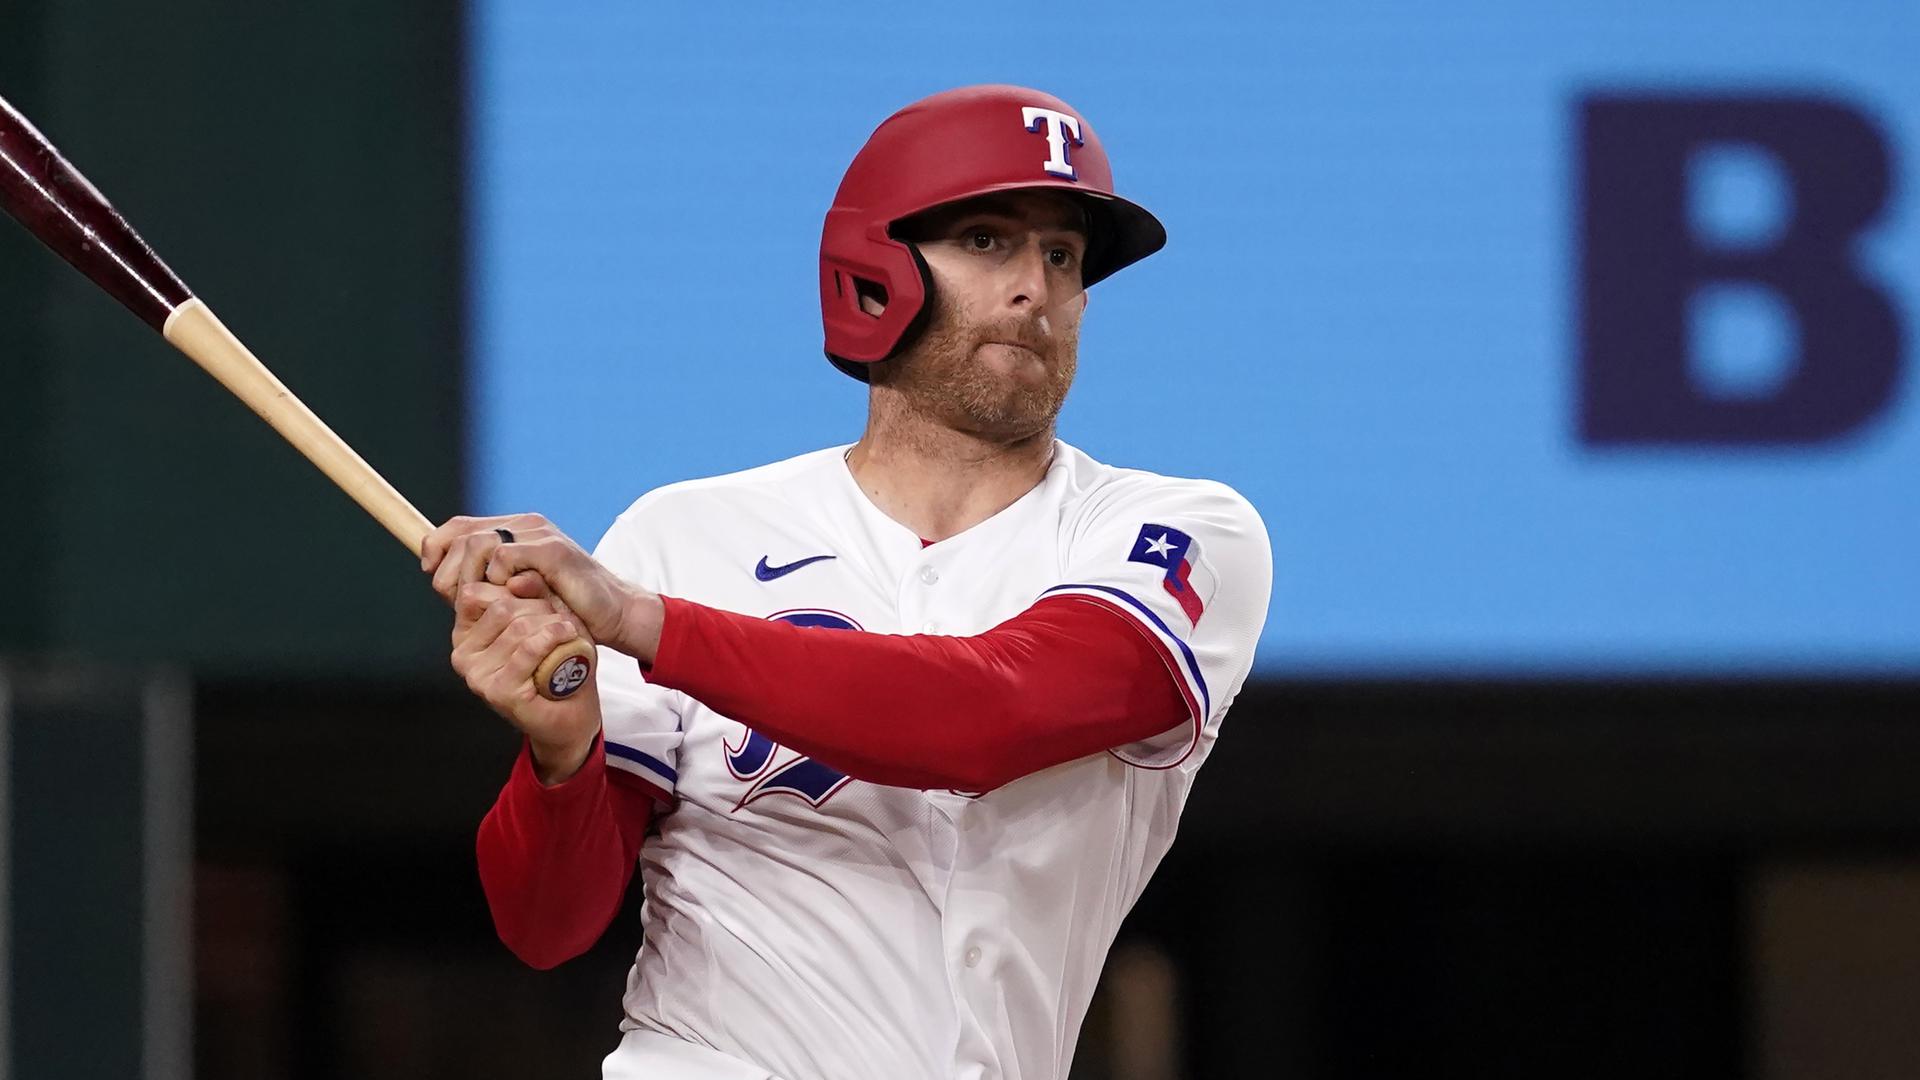 Texas Rangers - OFFICIAL: We've signed OF/INF Brad Miller